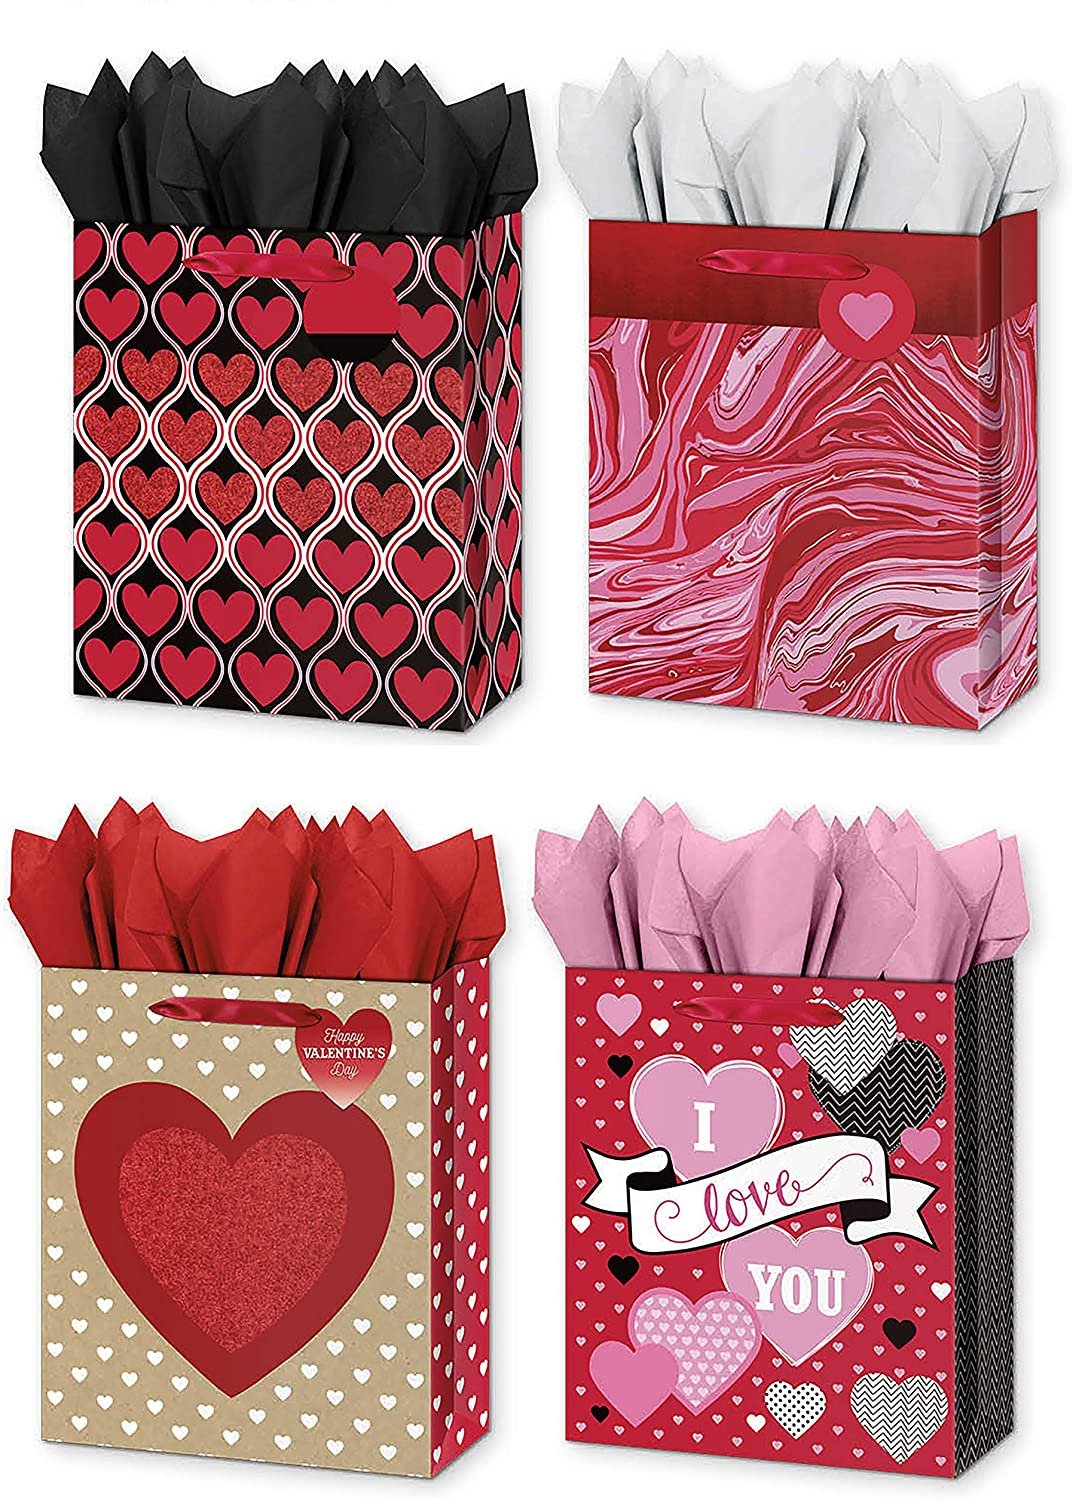 4 Large Gift Bags w/Tissue Paper Included Great for Valentines Day,  Anniversary, Mothers Day, Birthday 